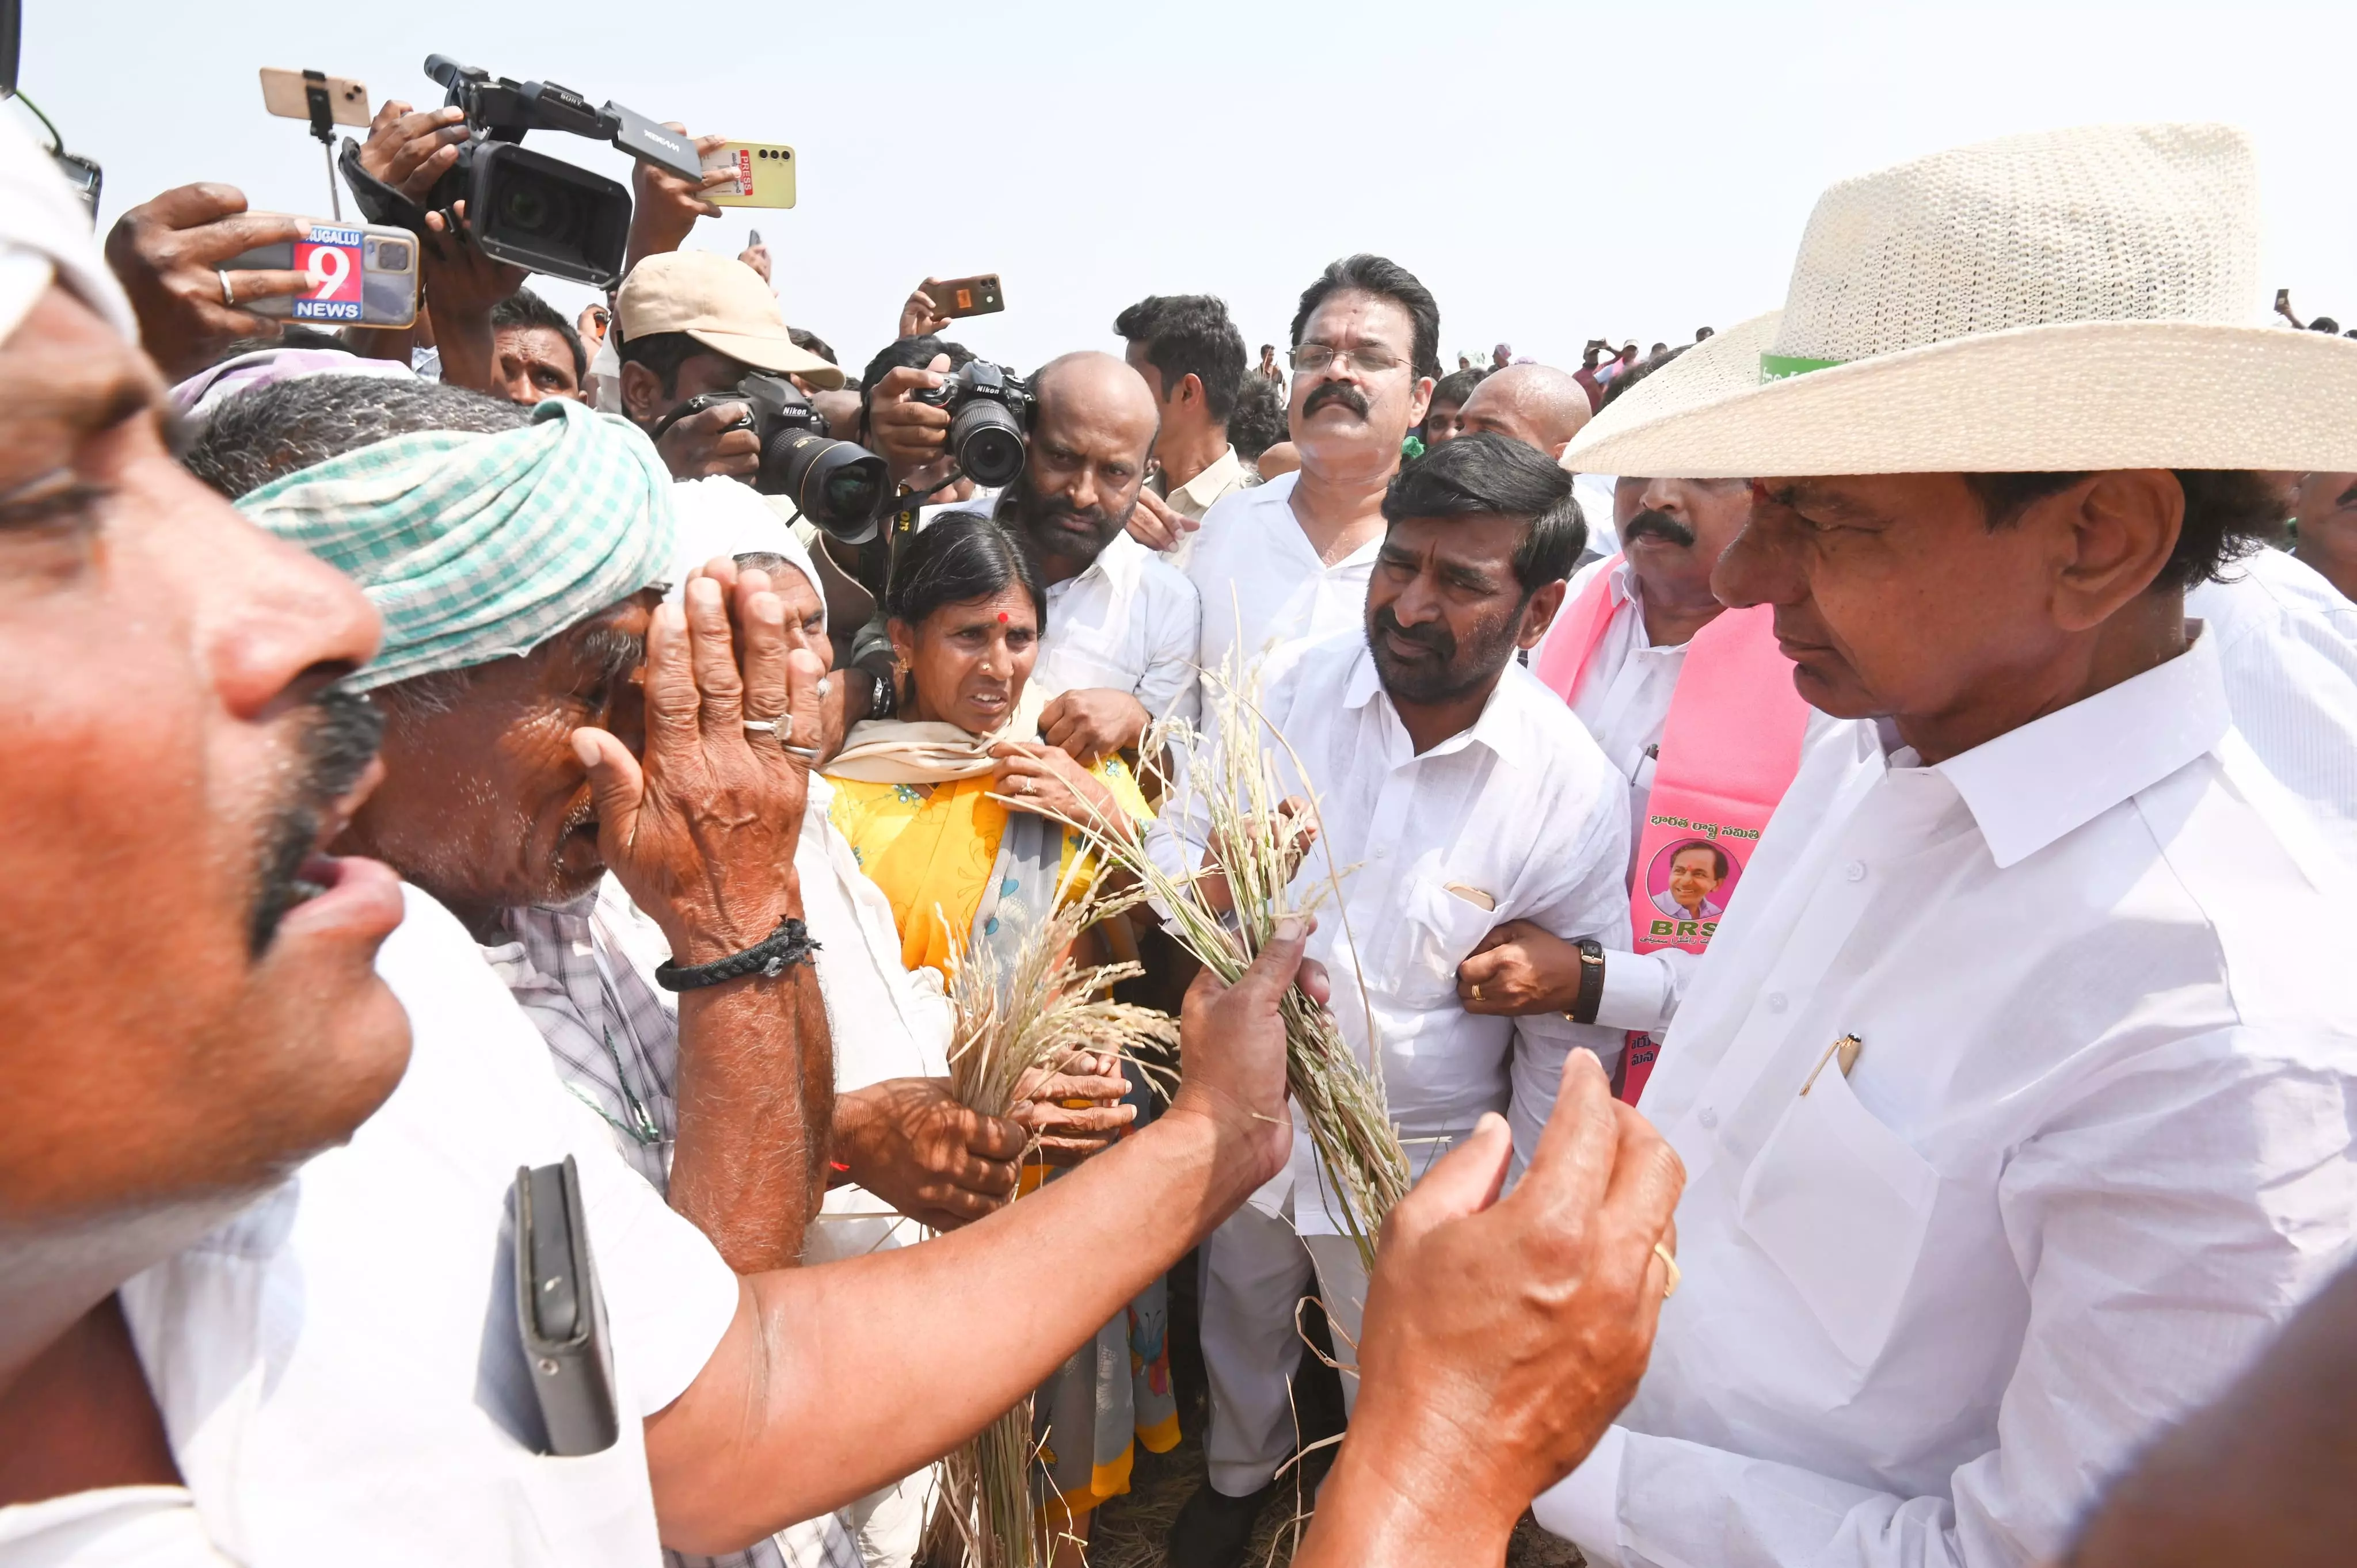 200 Telangana farmers died by suicide in 100 days of Congress govt: Ex-CM KCR